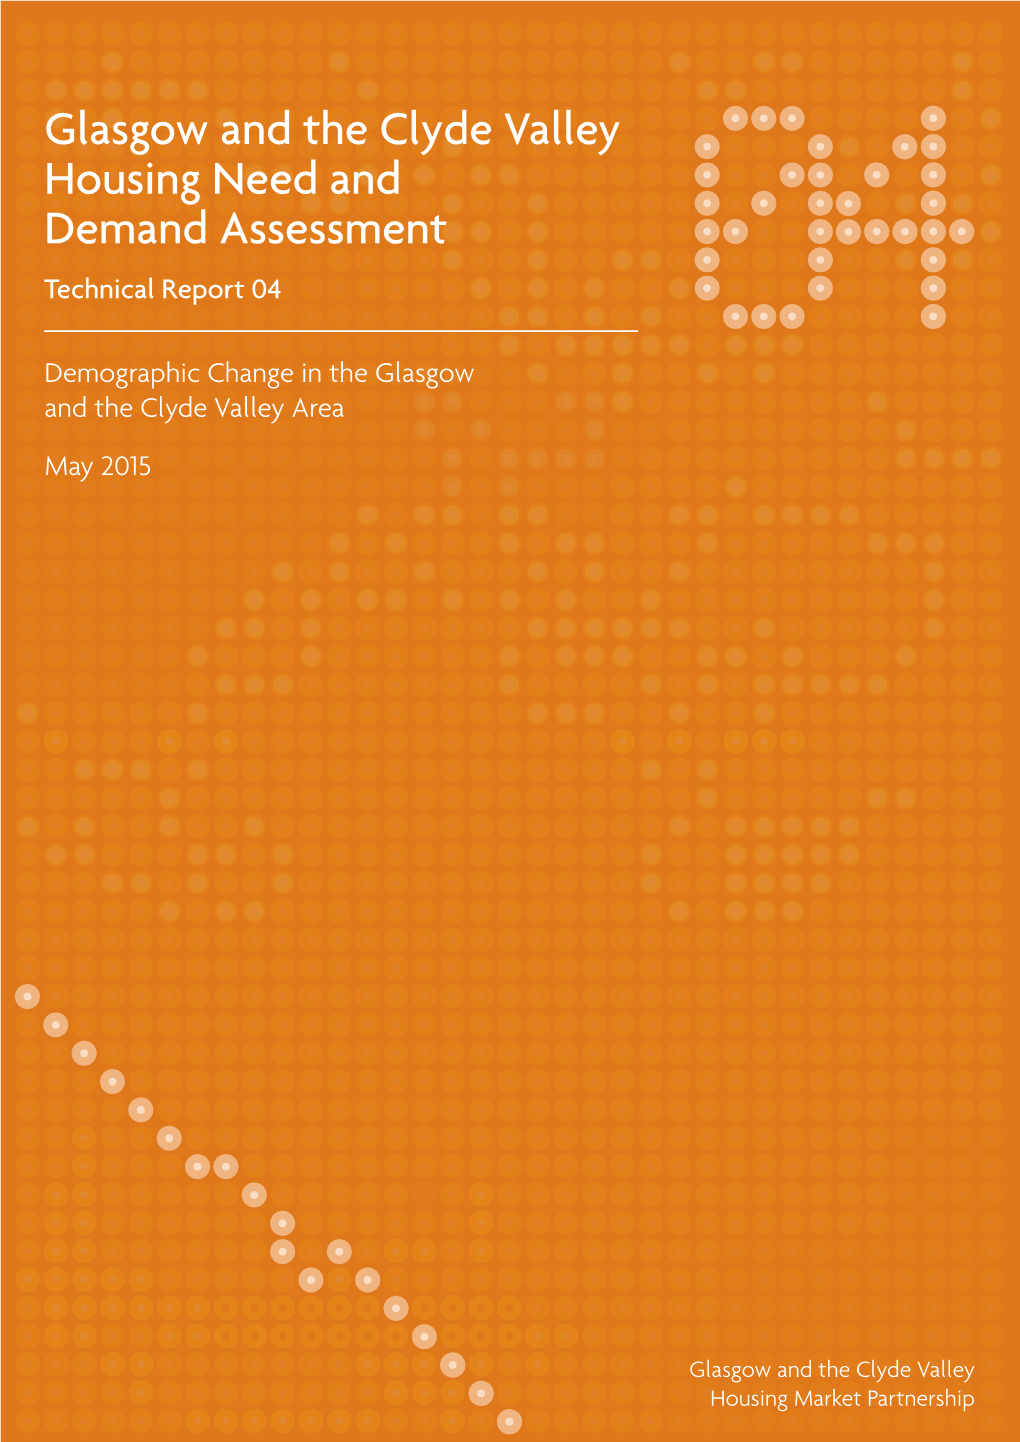 Glasgow and the Clyde Valley Housing Need and Demand Assessment Technical Report 04